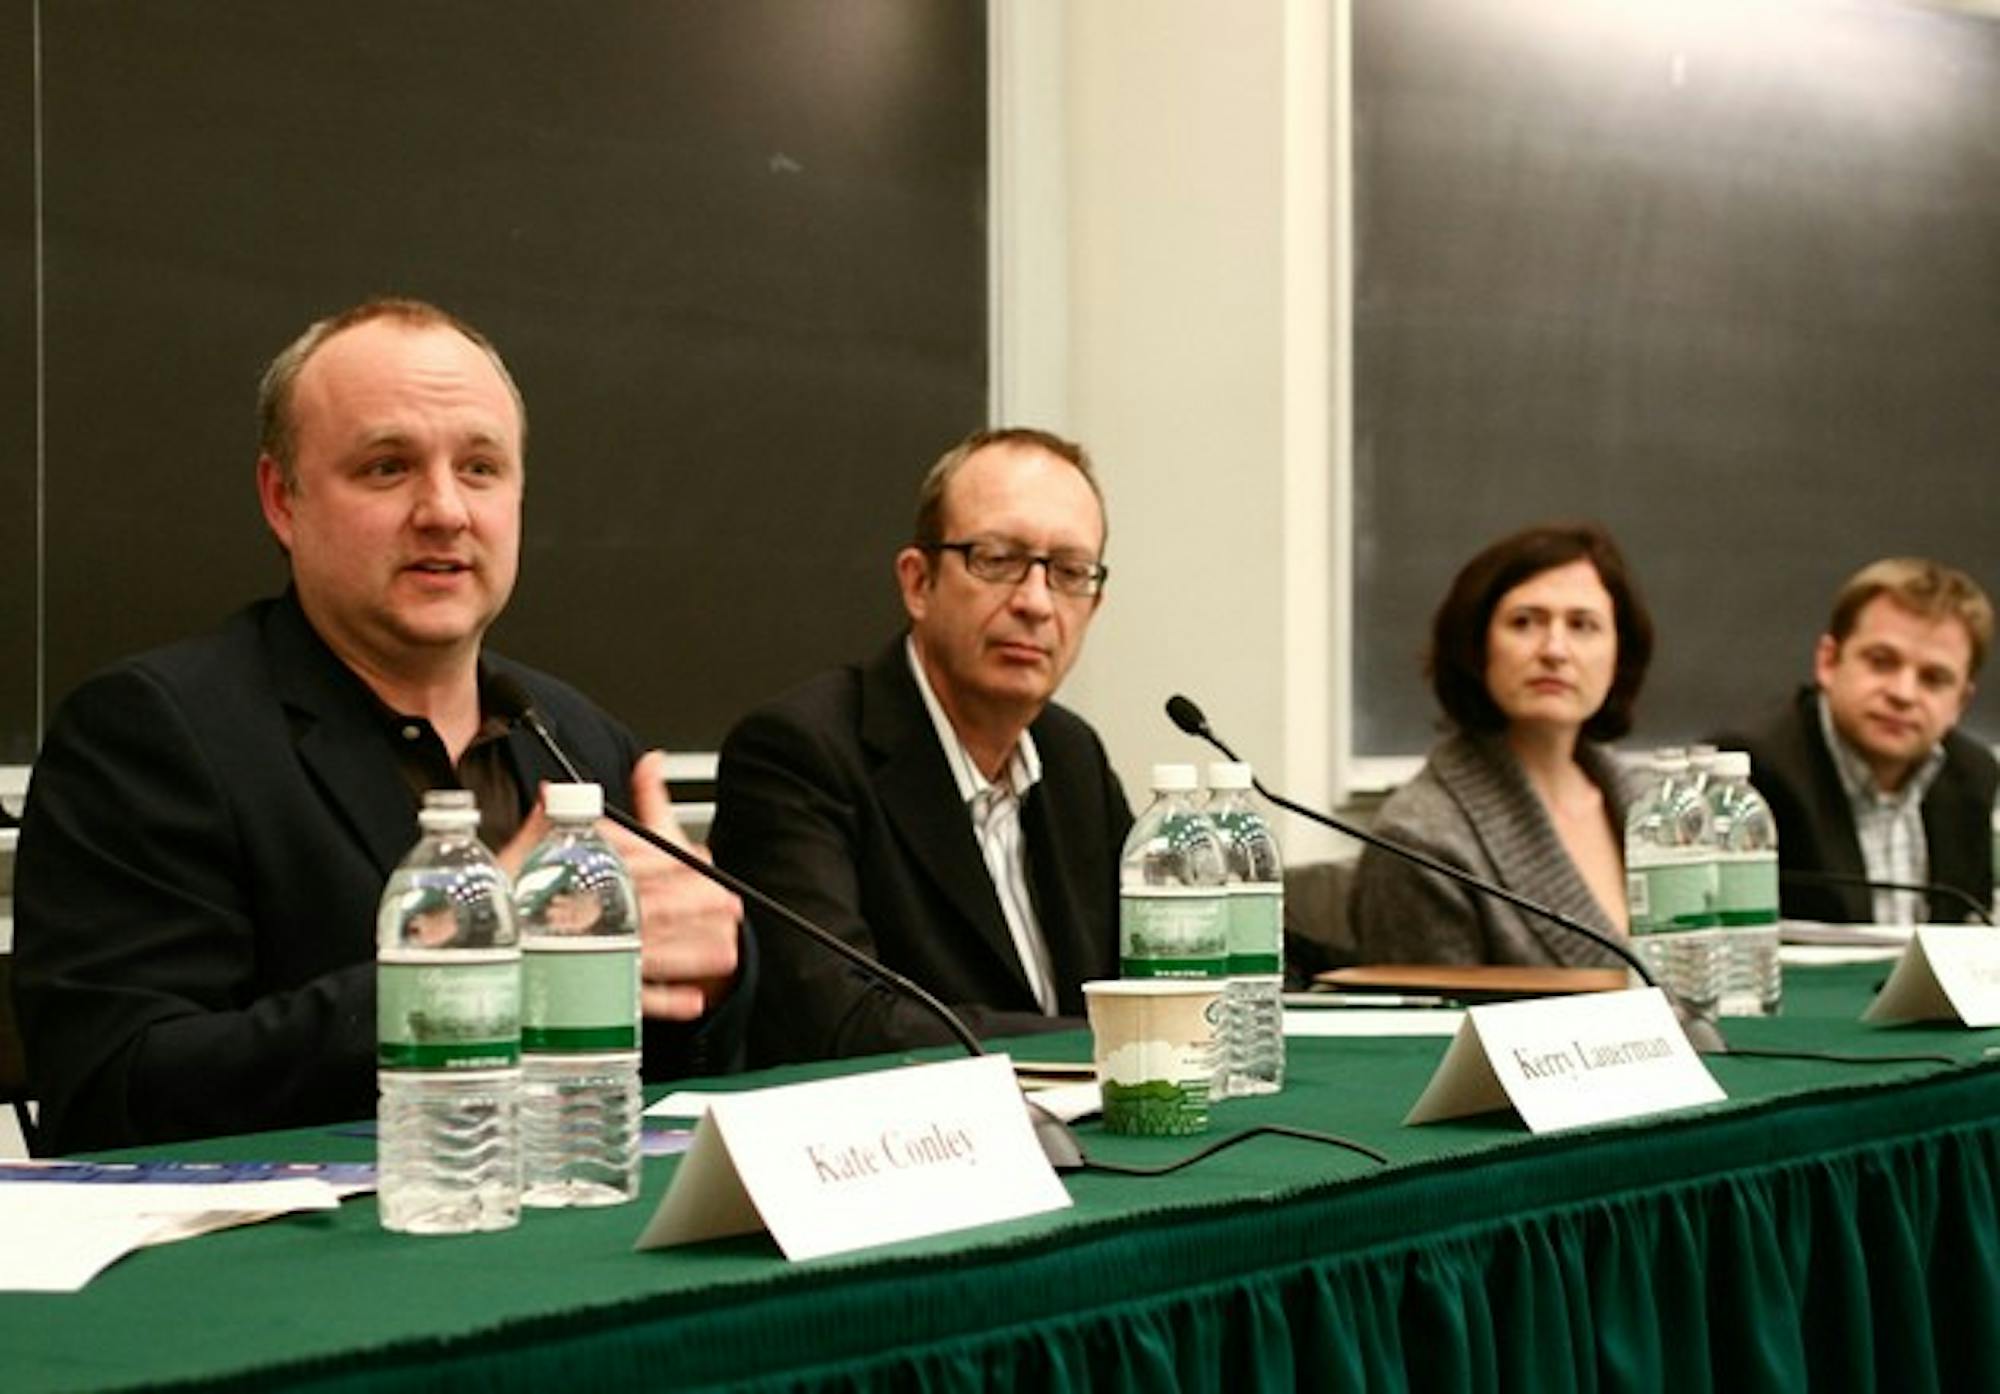 Journalists at Wednesday's panel described the way the journalism industry has adapted to technological advancements in the Internet age.